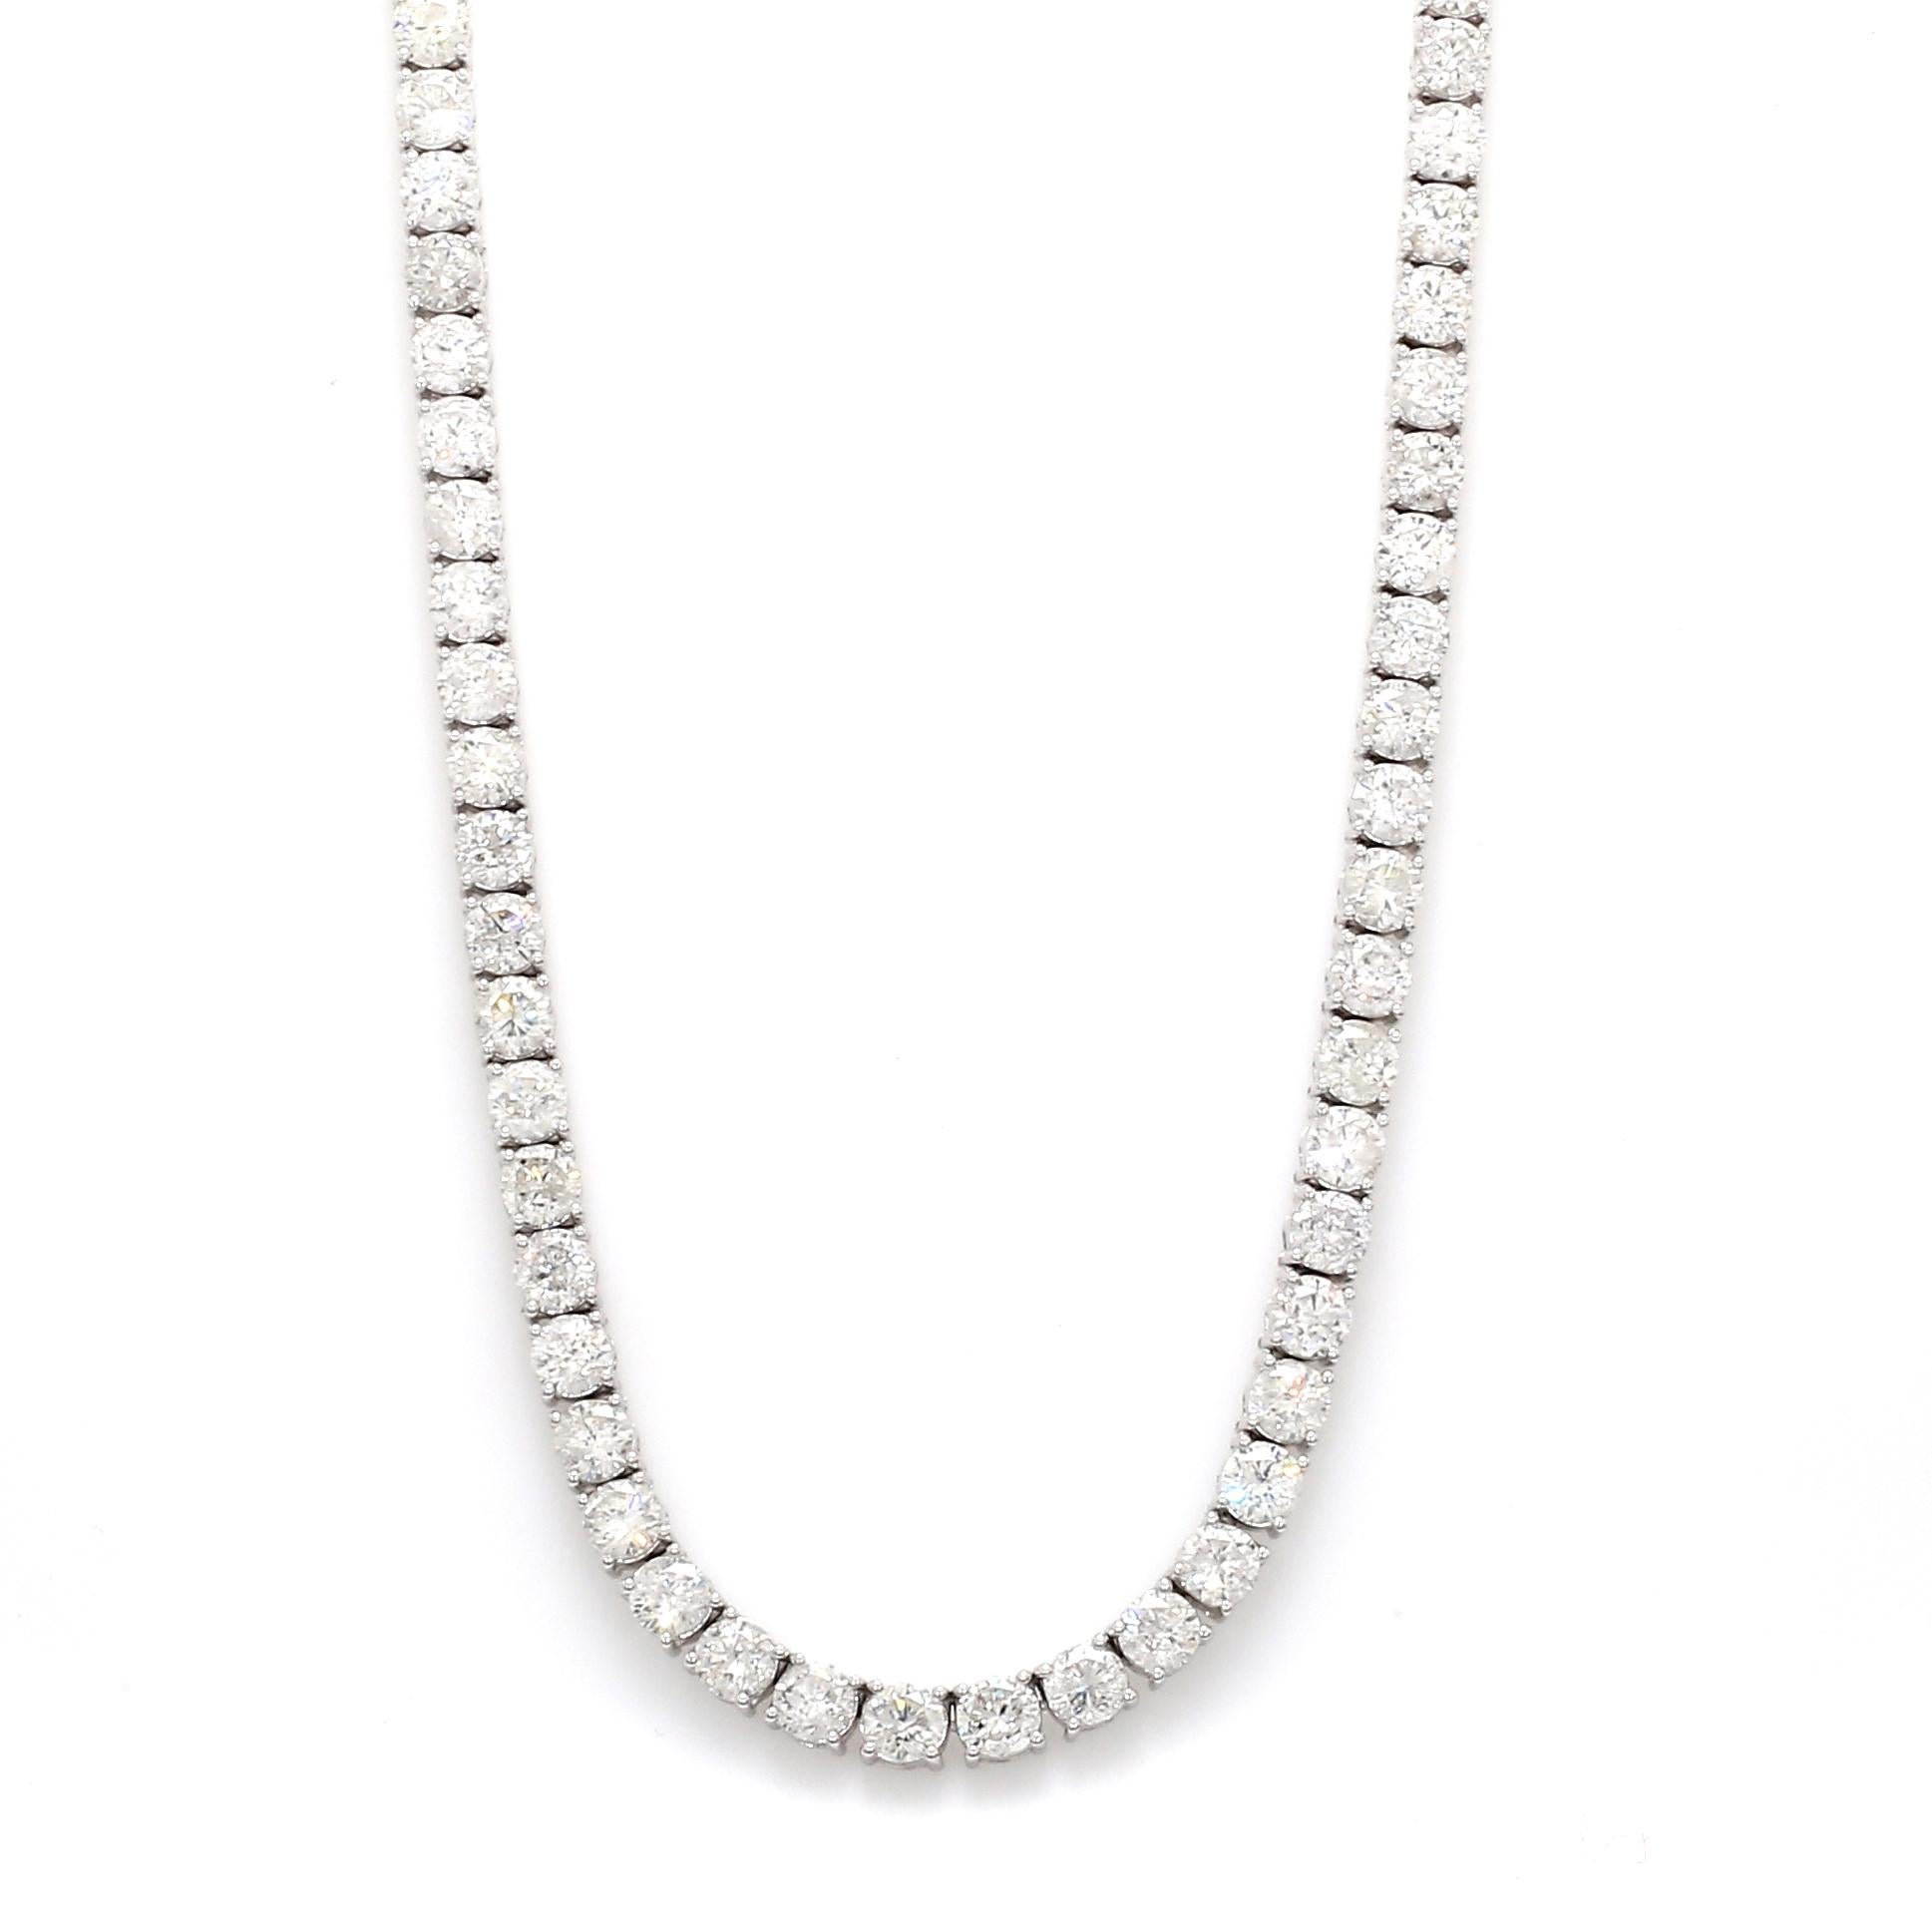 This diamond tennis chain necklace is a versatile accessory that adds glamour and sophistication to any ensemble. Whether worn for a special occasion or to elevate everyday attire, it exudes elegance and refinement. The length of the necklace is